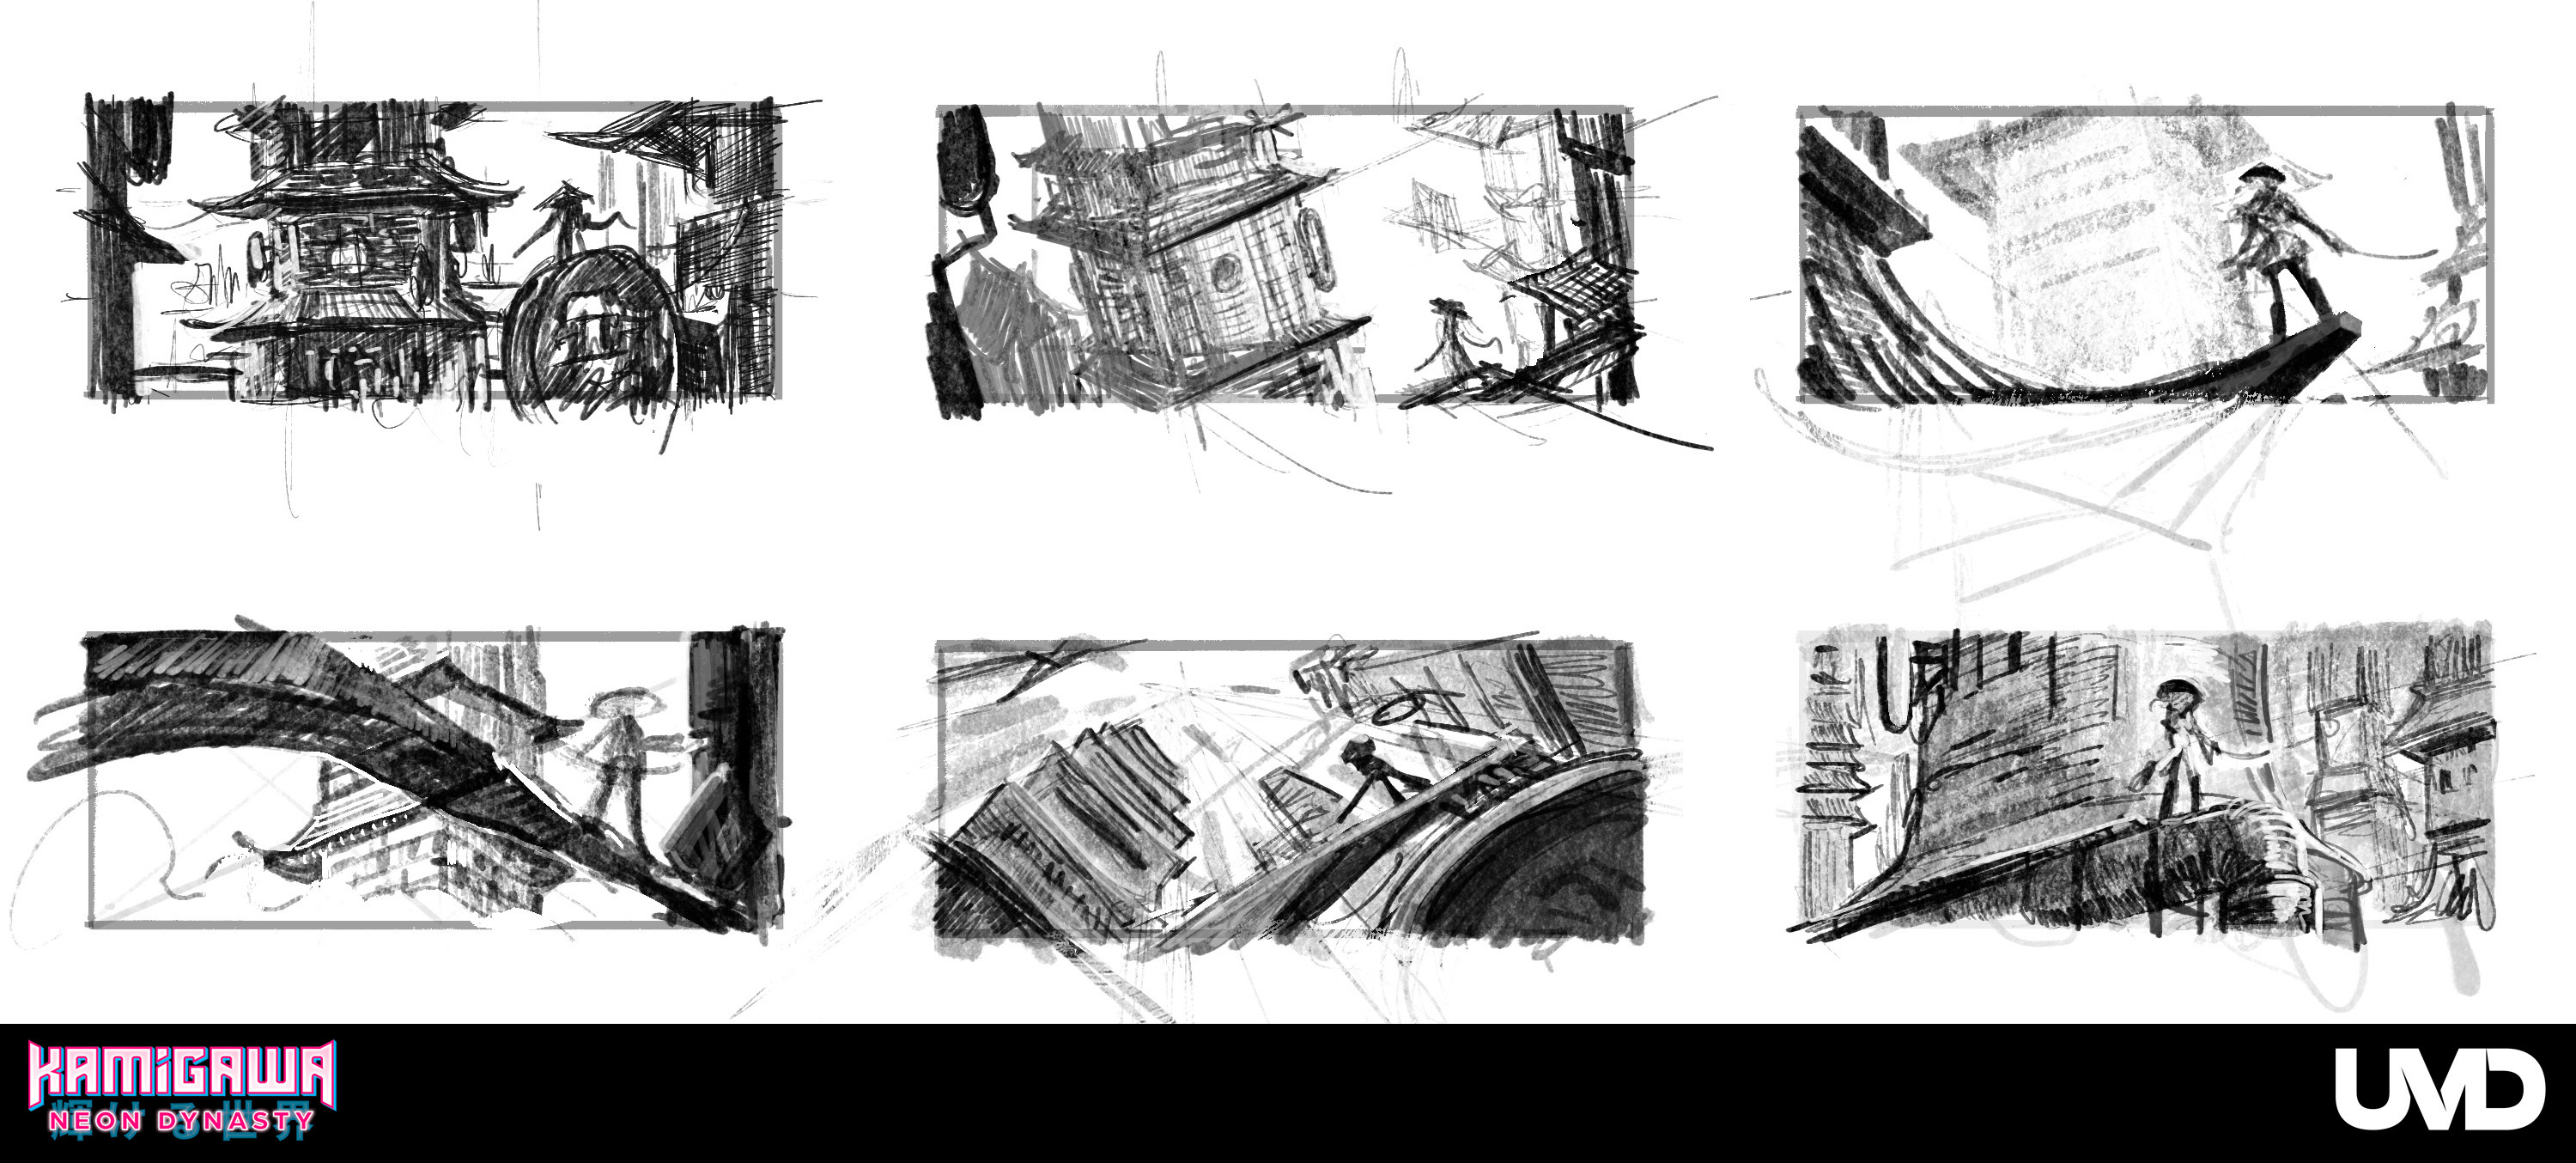 Some early thumbnail sketches